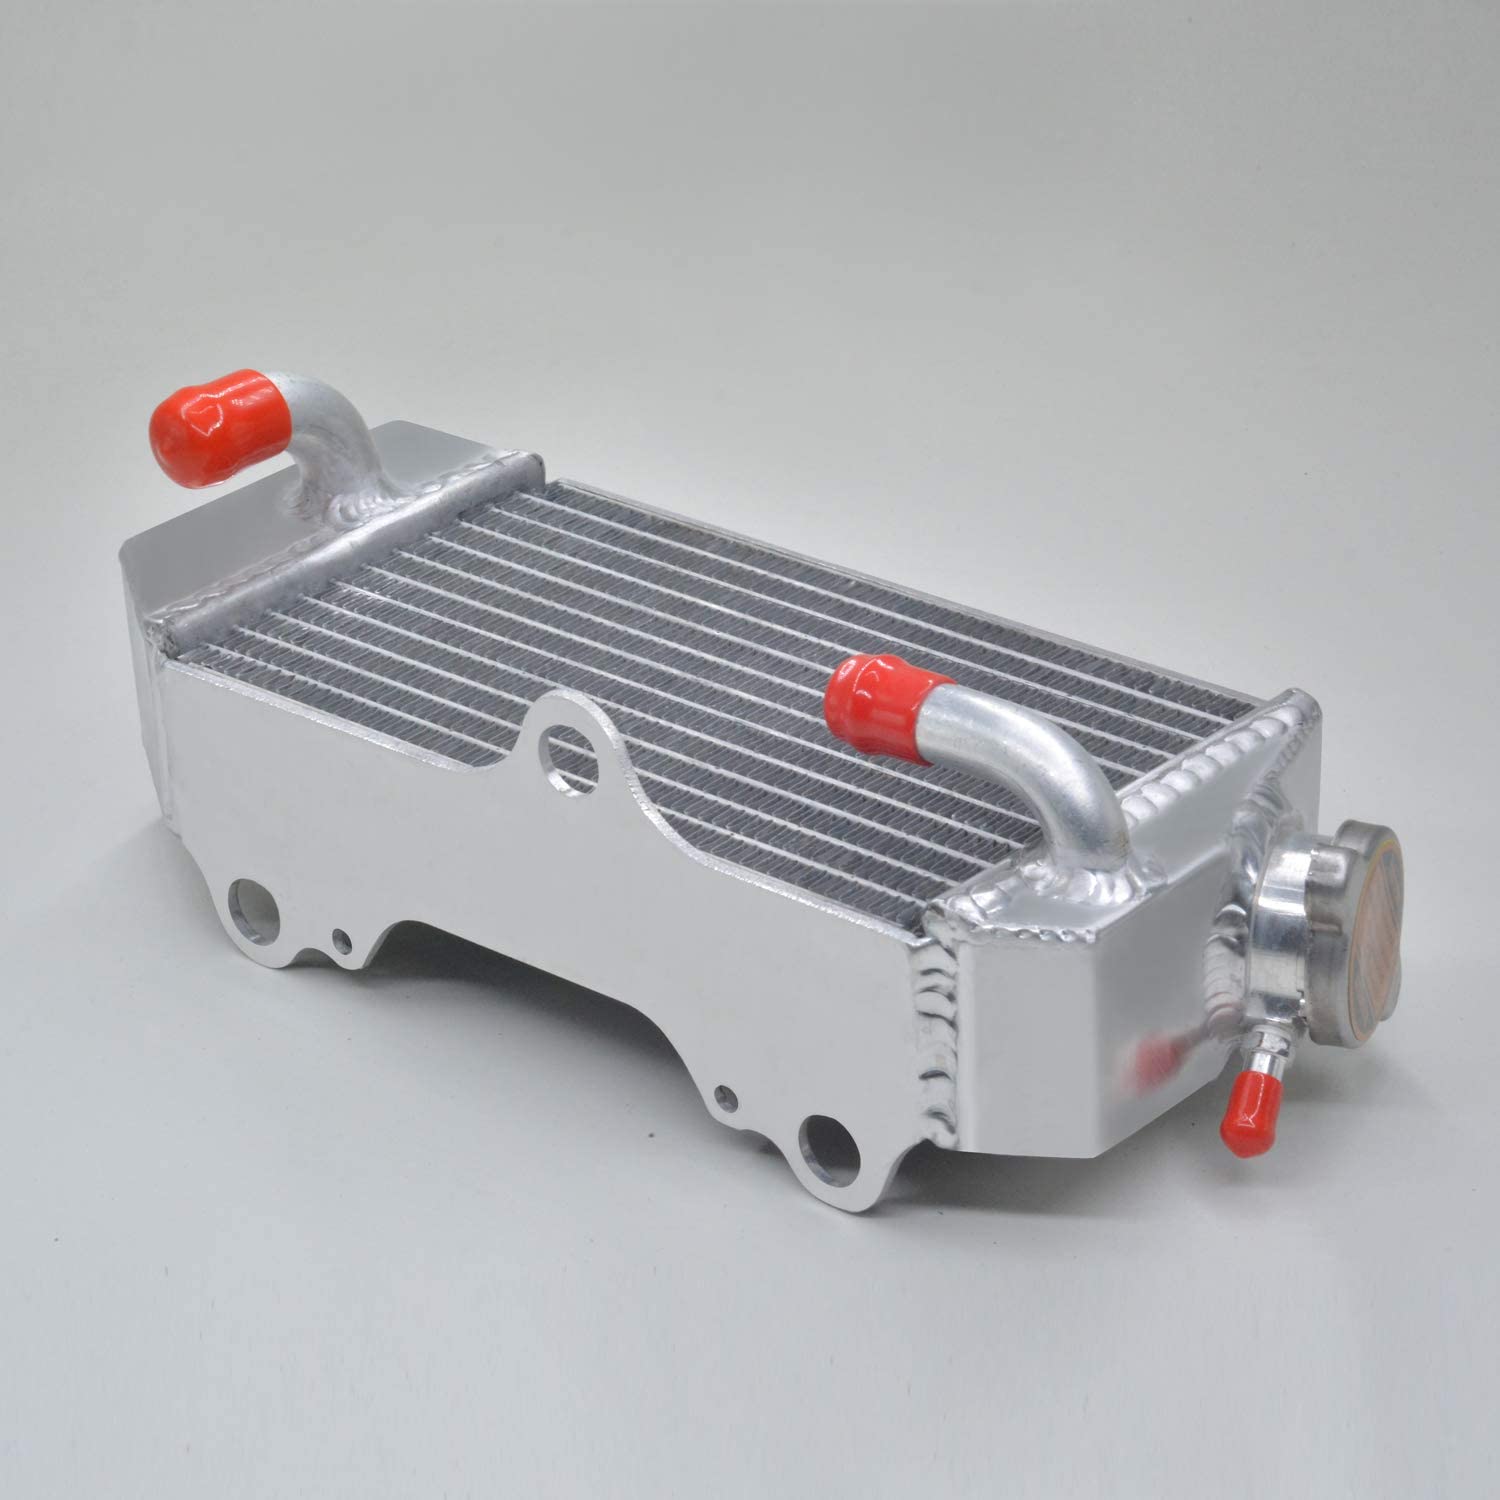 017Y aluminum alloy Radiator & Fit For Yamaha YZ85 2002-2009 2003 2004 2005 (with stopper) (with stopper)